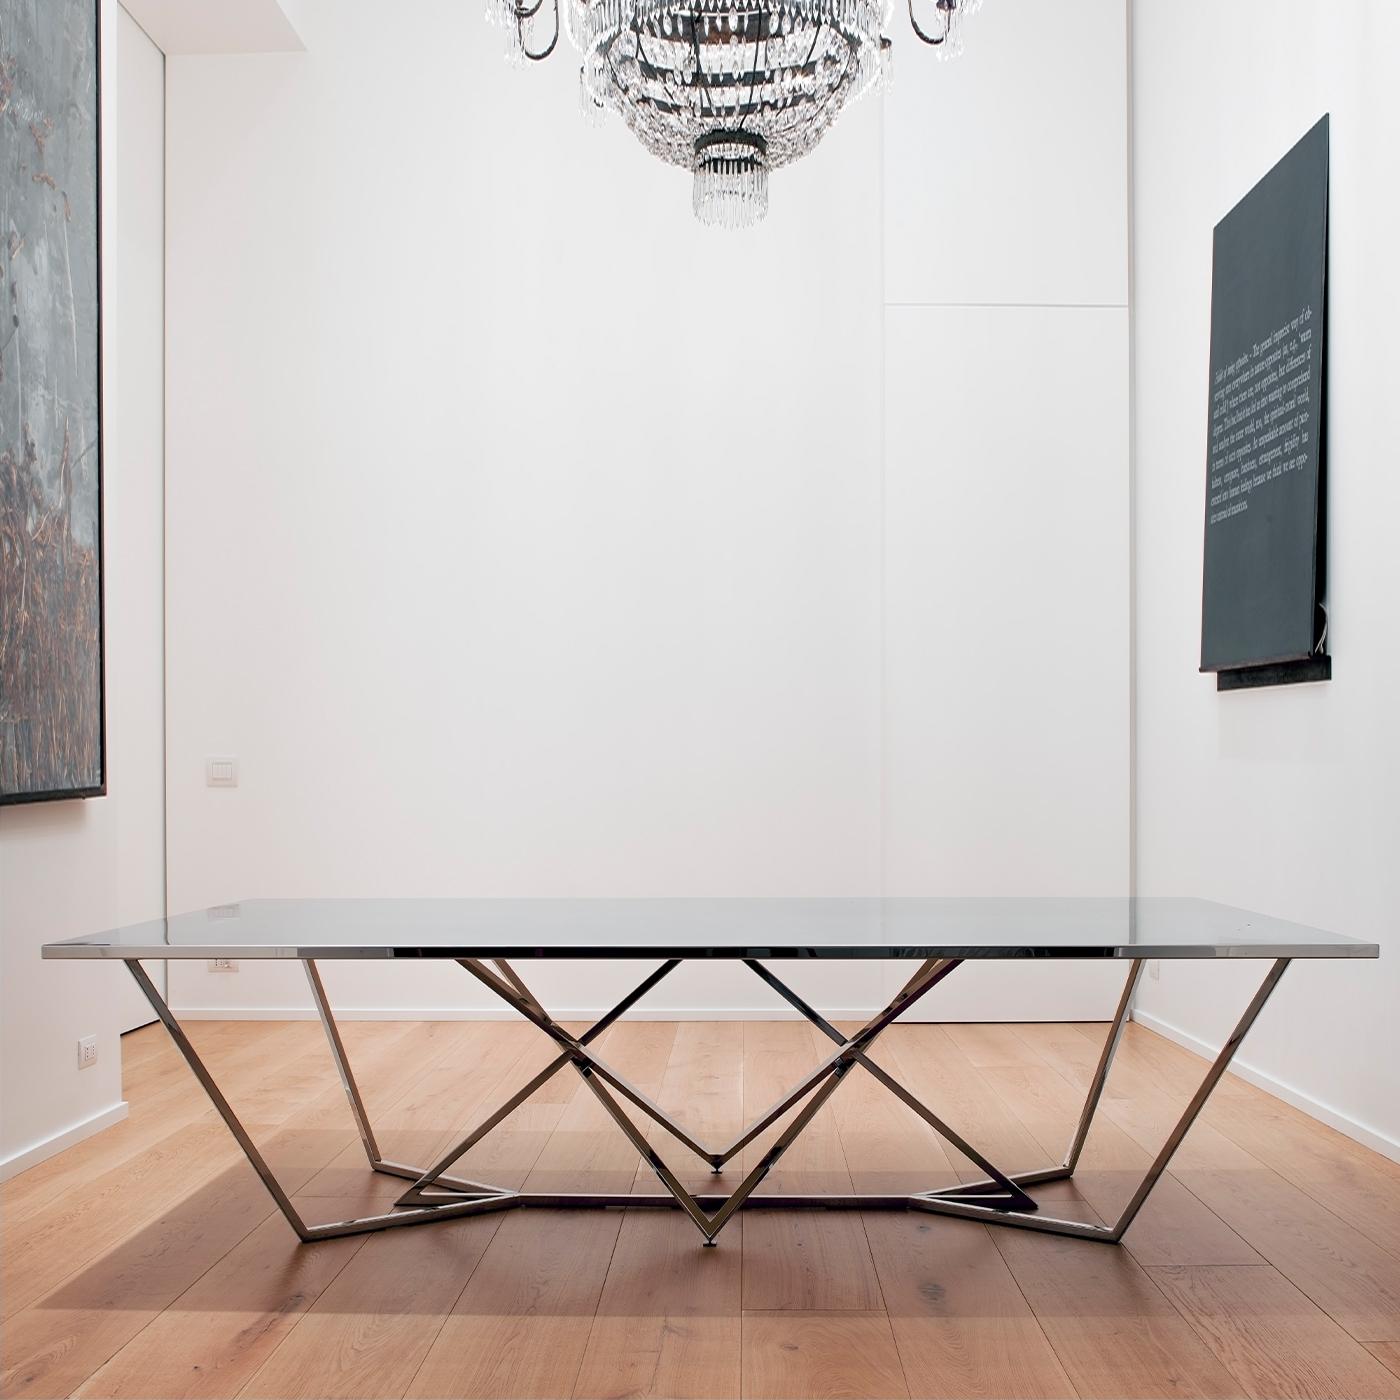 An intriguing spider-web-like steel structure lends this stately table its distinctive sculptural appeal. Perfect as a conference table in stylish professional contexts, it boasts a glossy finish on the frame that sustains a bold rectangular top